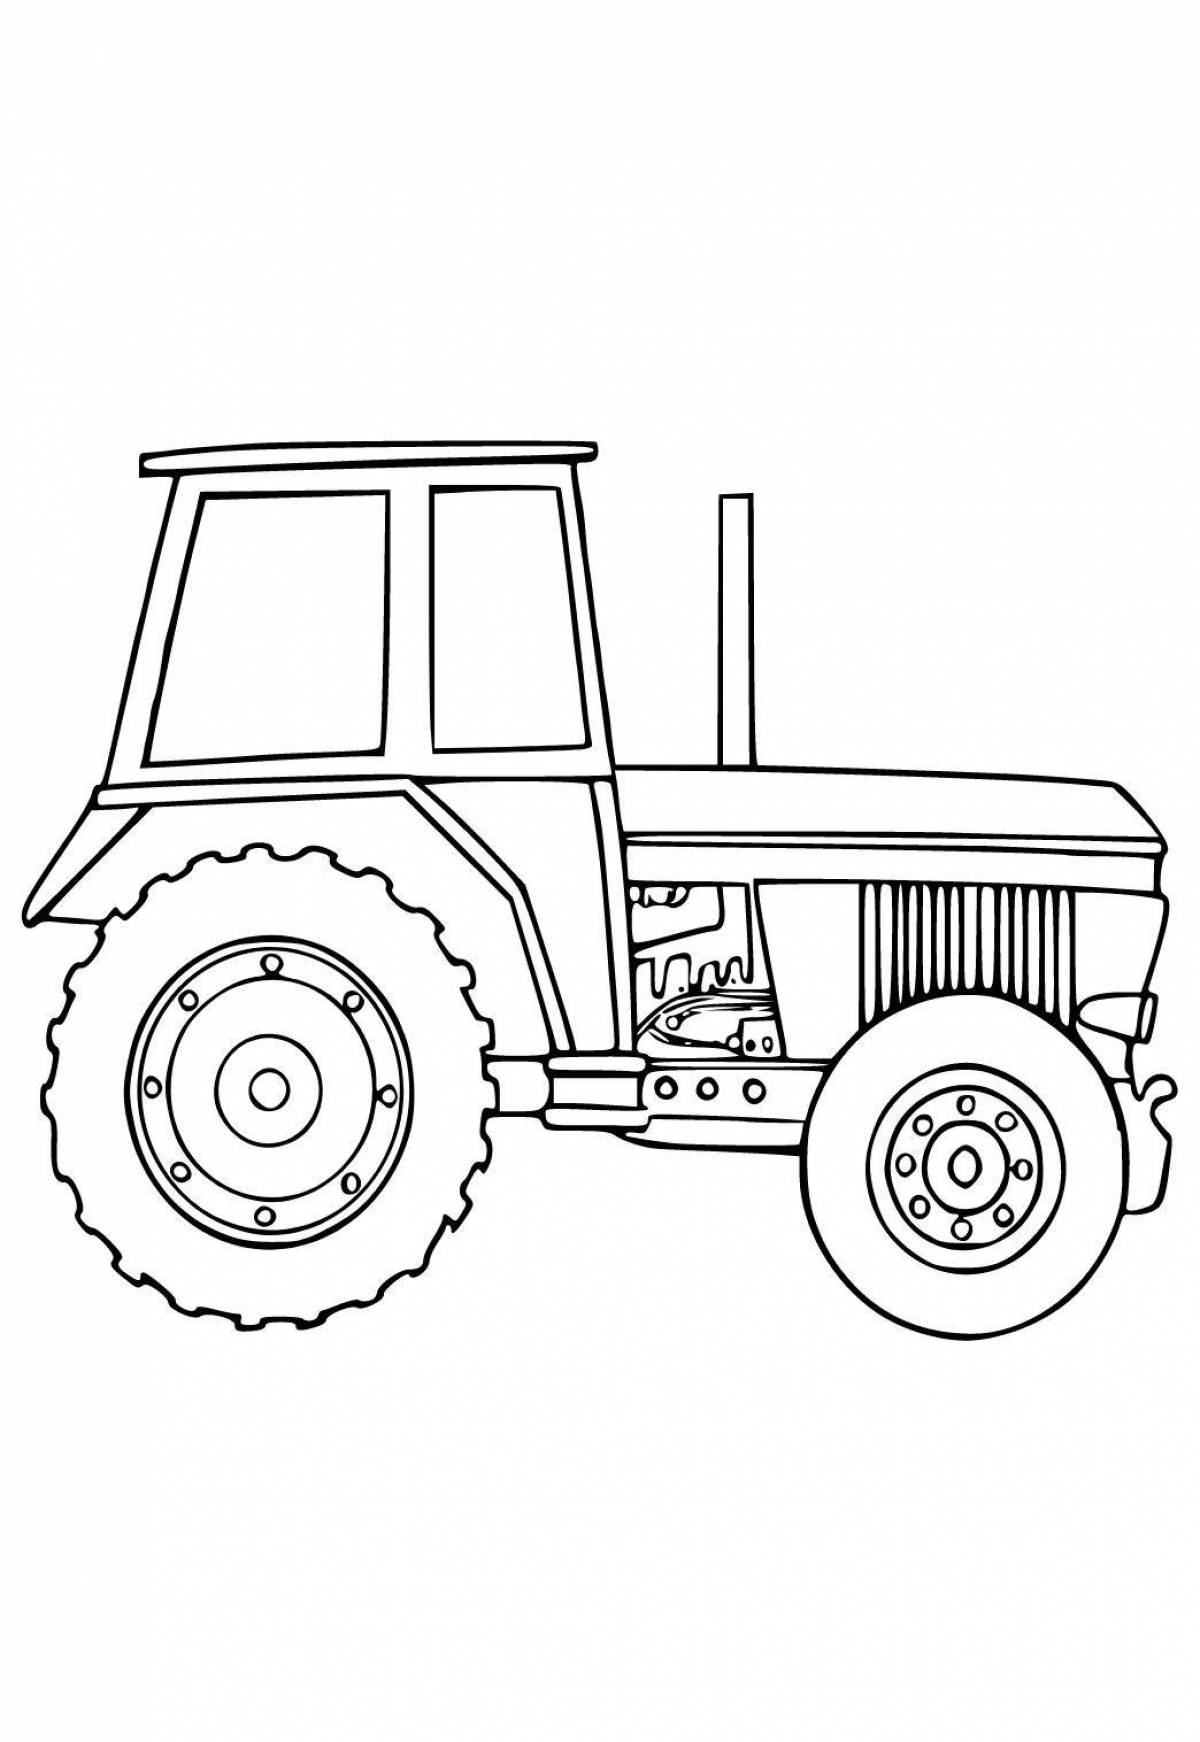 Coloring page funny tractor t 40